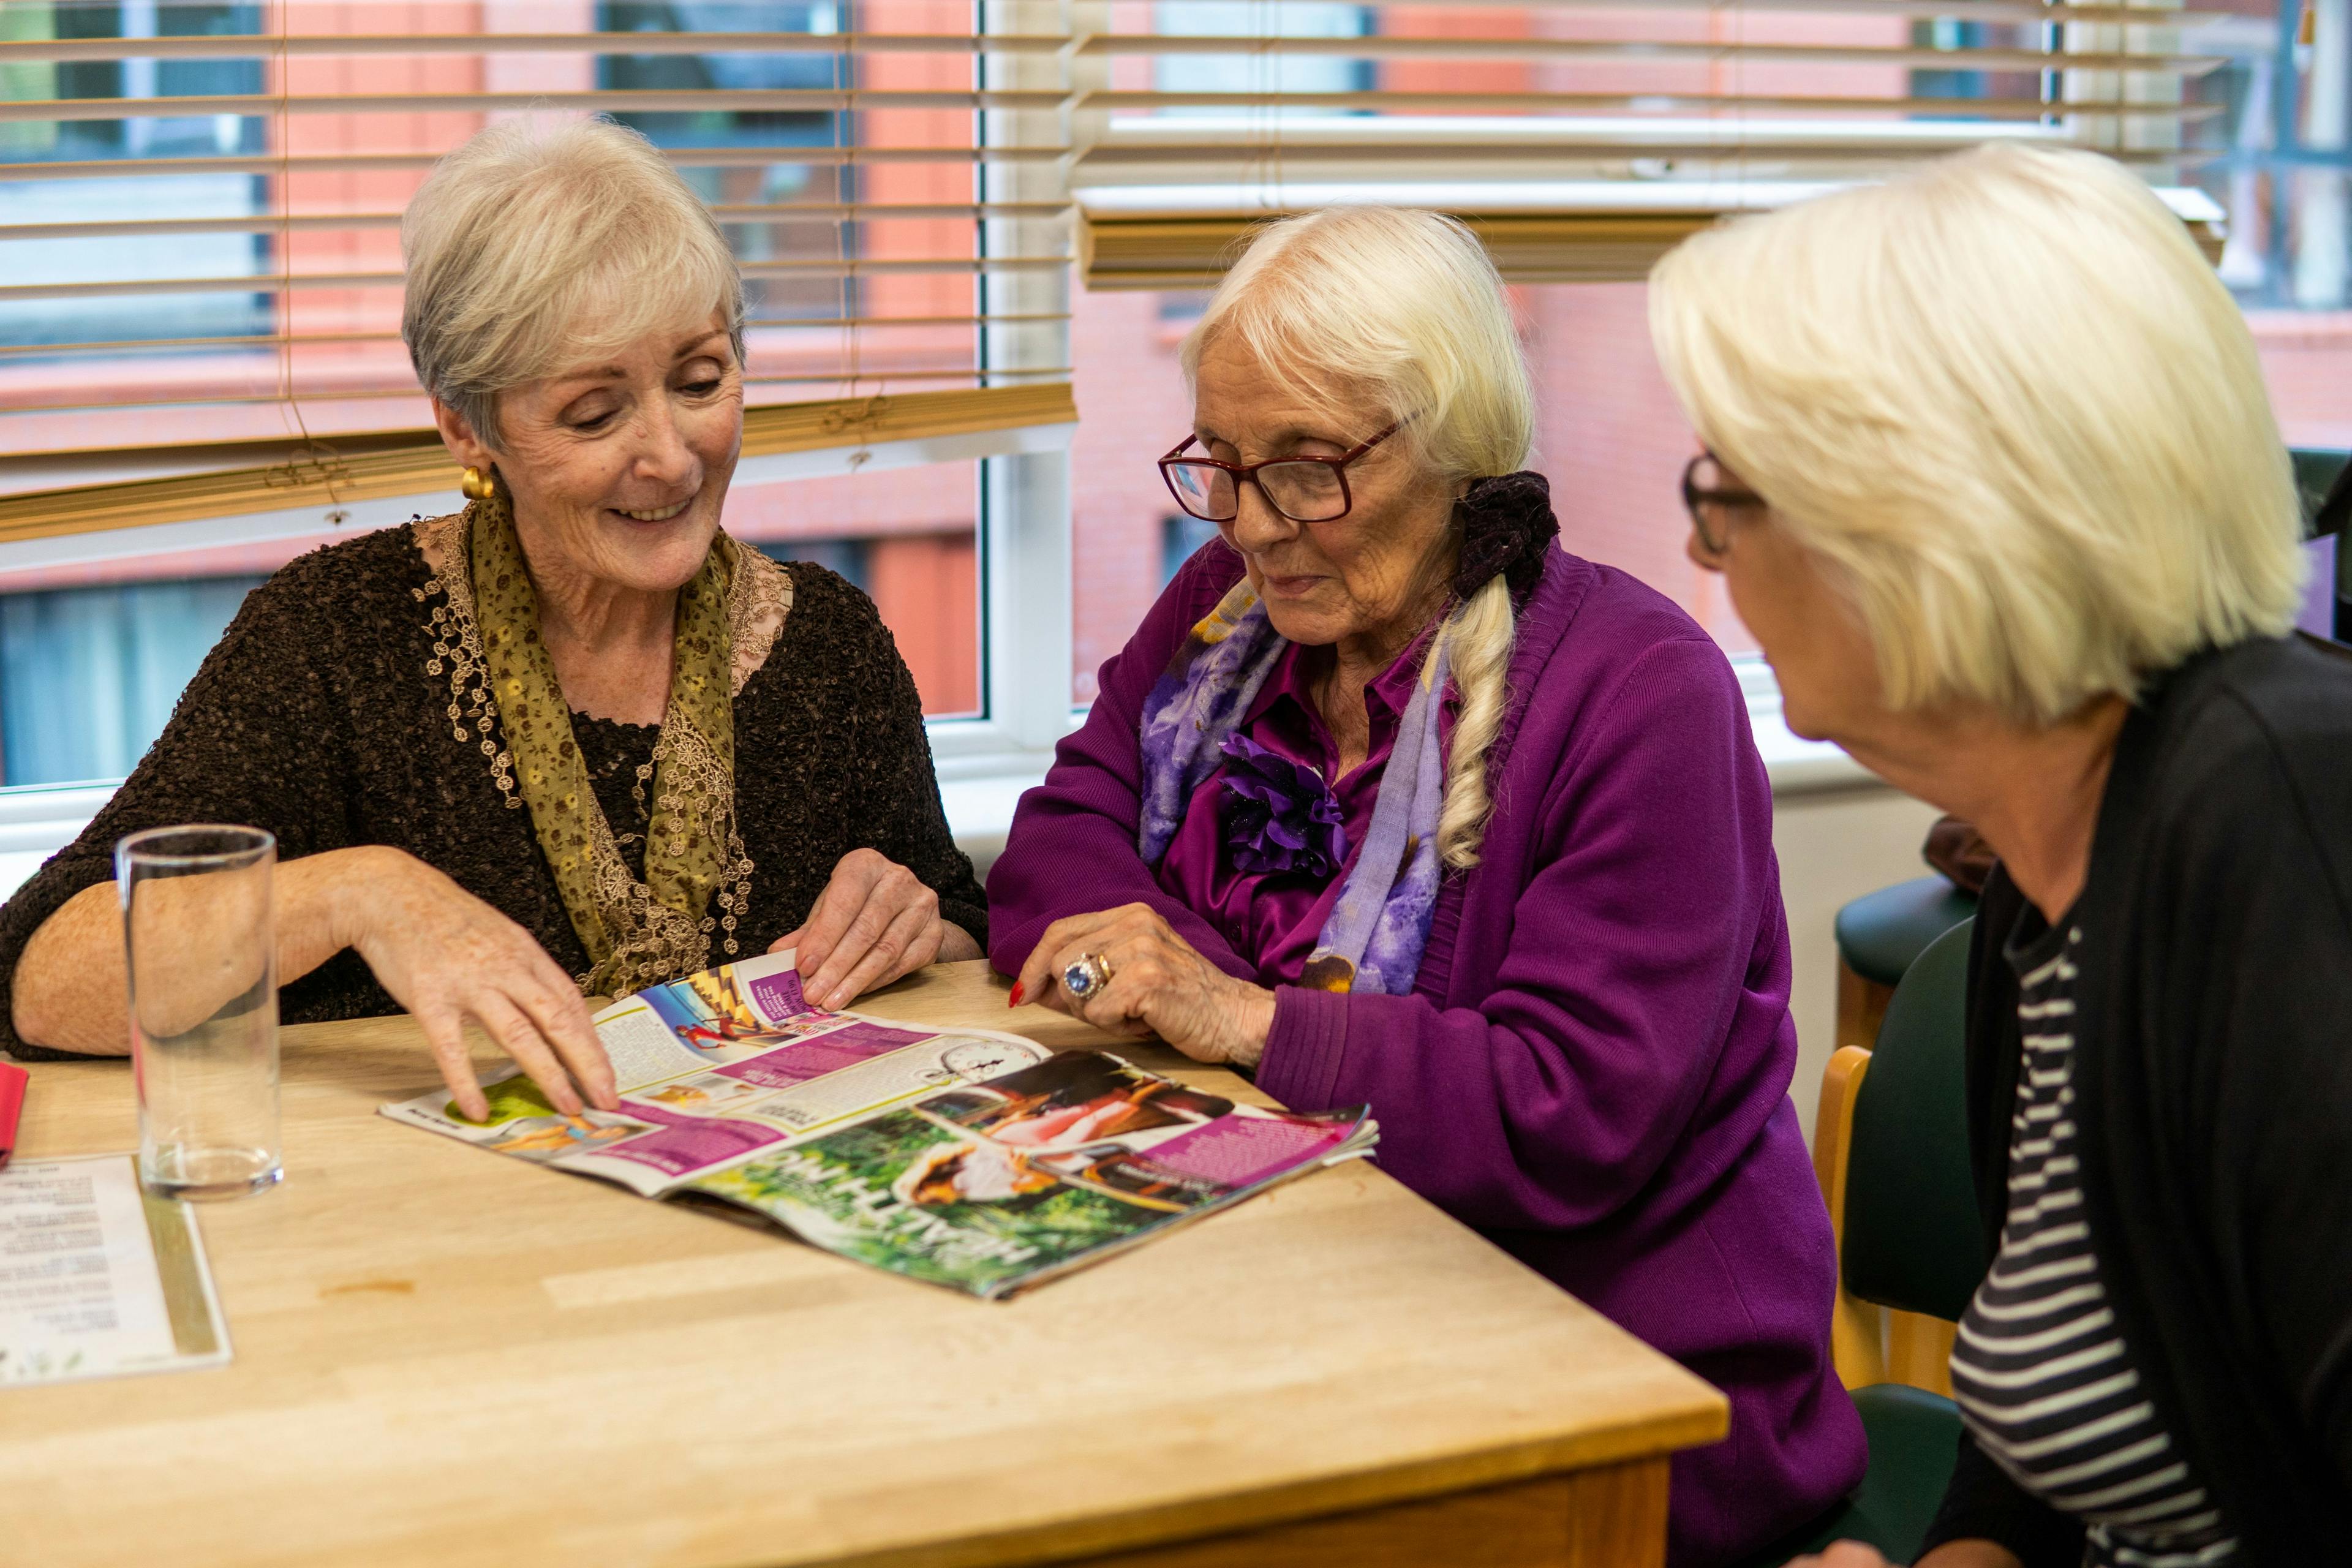 Middle aged female carer sat with two women looking at a magazine